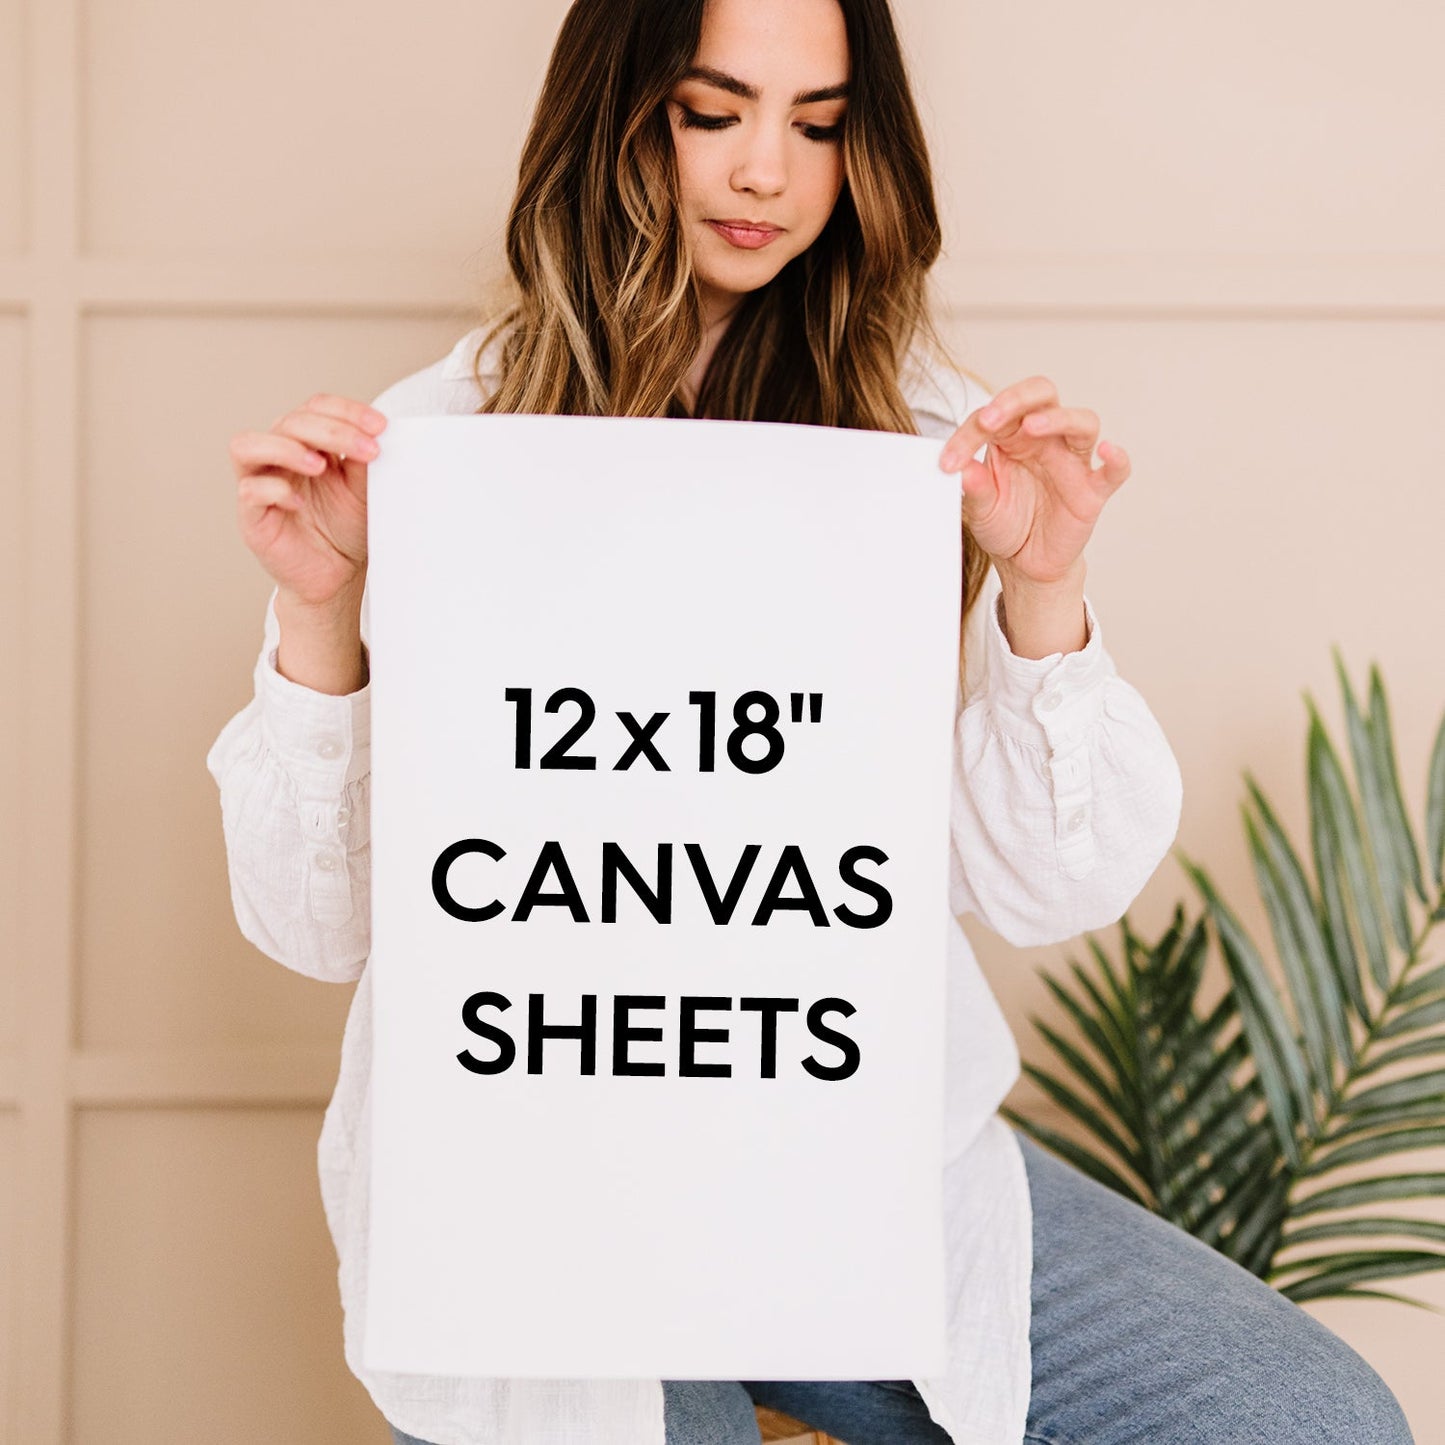 12x18" Blank Canvas For Painting - Unstretched 100% Cotton Canvas Rolled Sheets - Hanger Frames